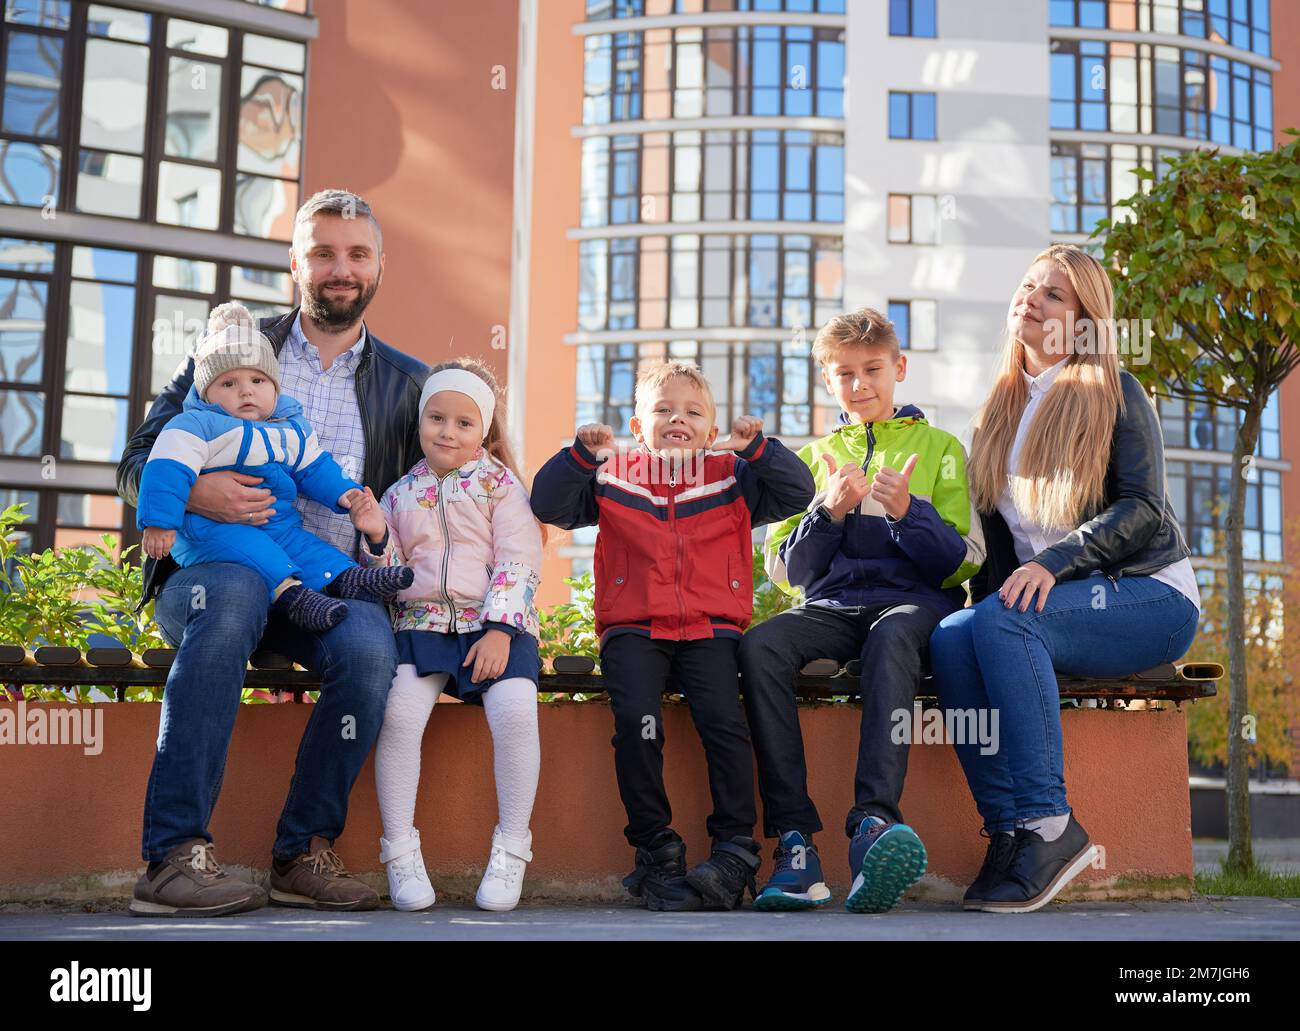 Happy family - father, mother and children having fun together on playground. Parents and kids sitting on bench, looking to camera. Modern residential buildings on background. Stock Photo